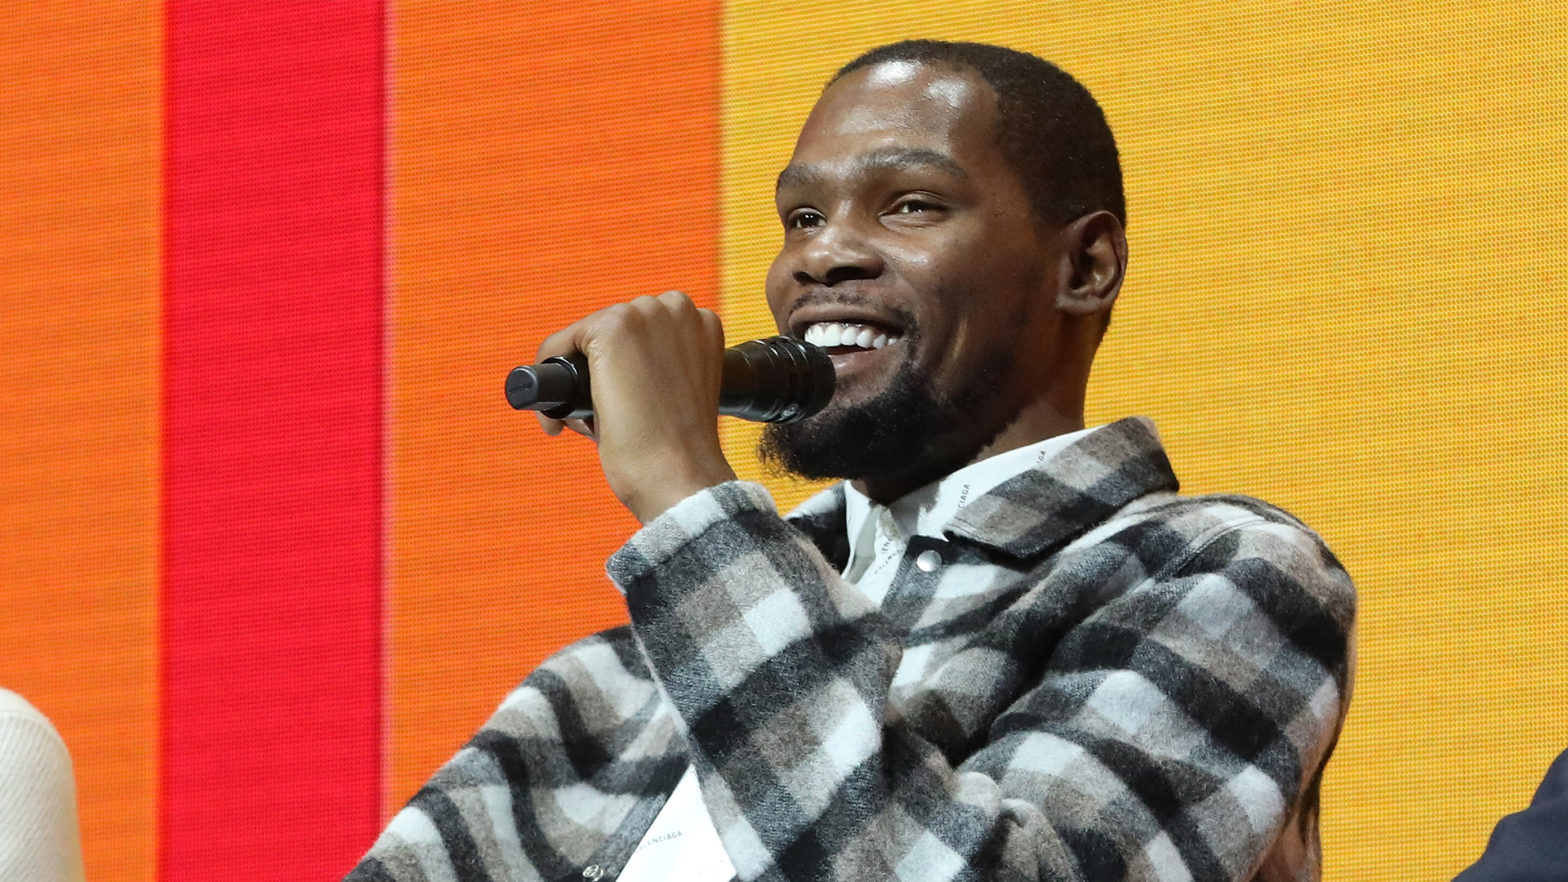 Kevin Durant Invests In The National Cycling League, The First Majority-Women And Minority-Owned Professional Sports League